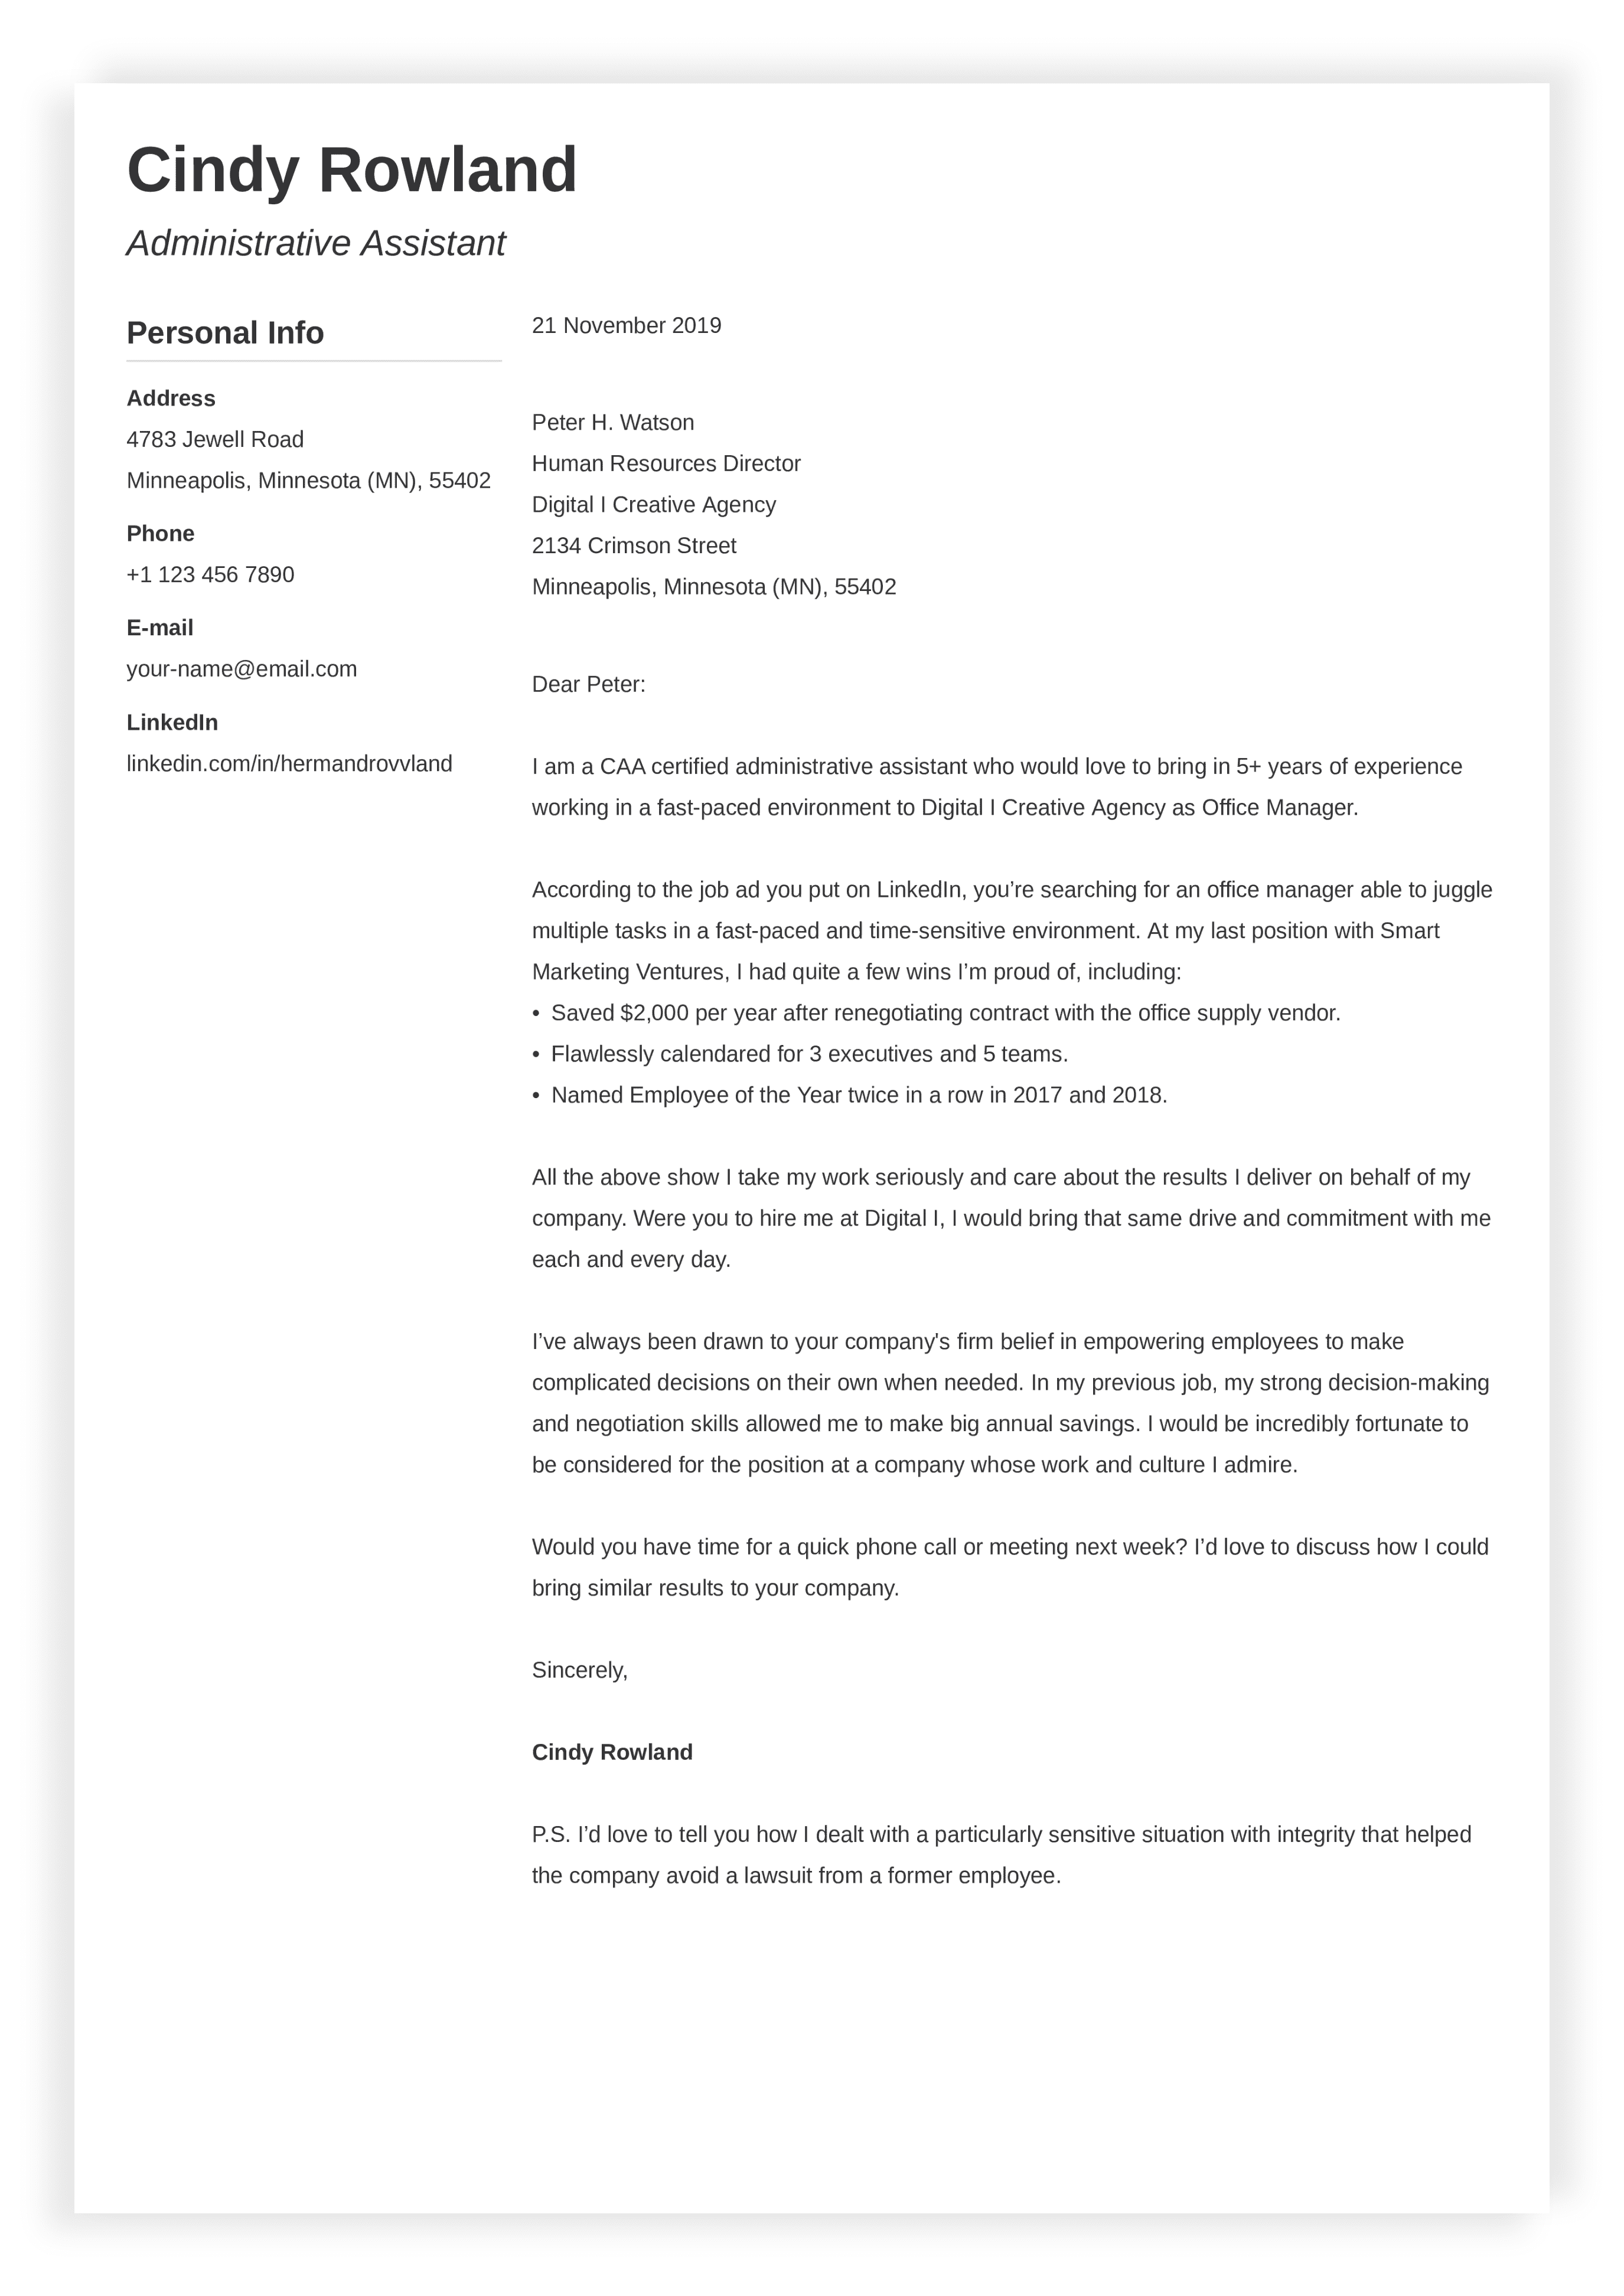 Do all resumes need a cover letter